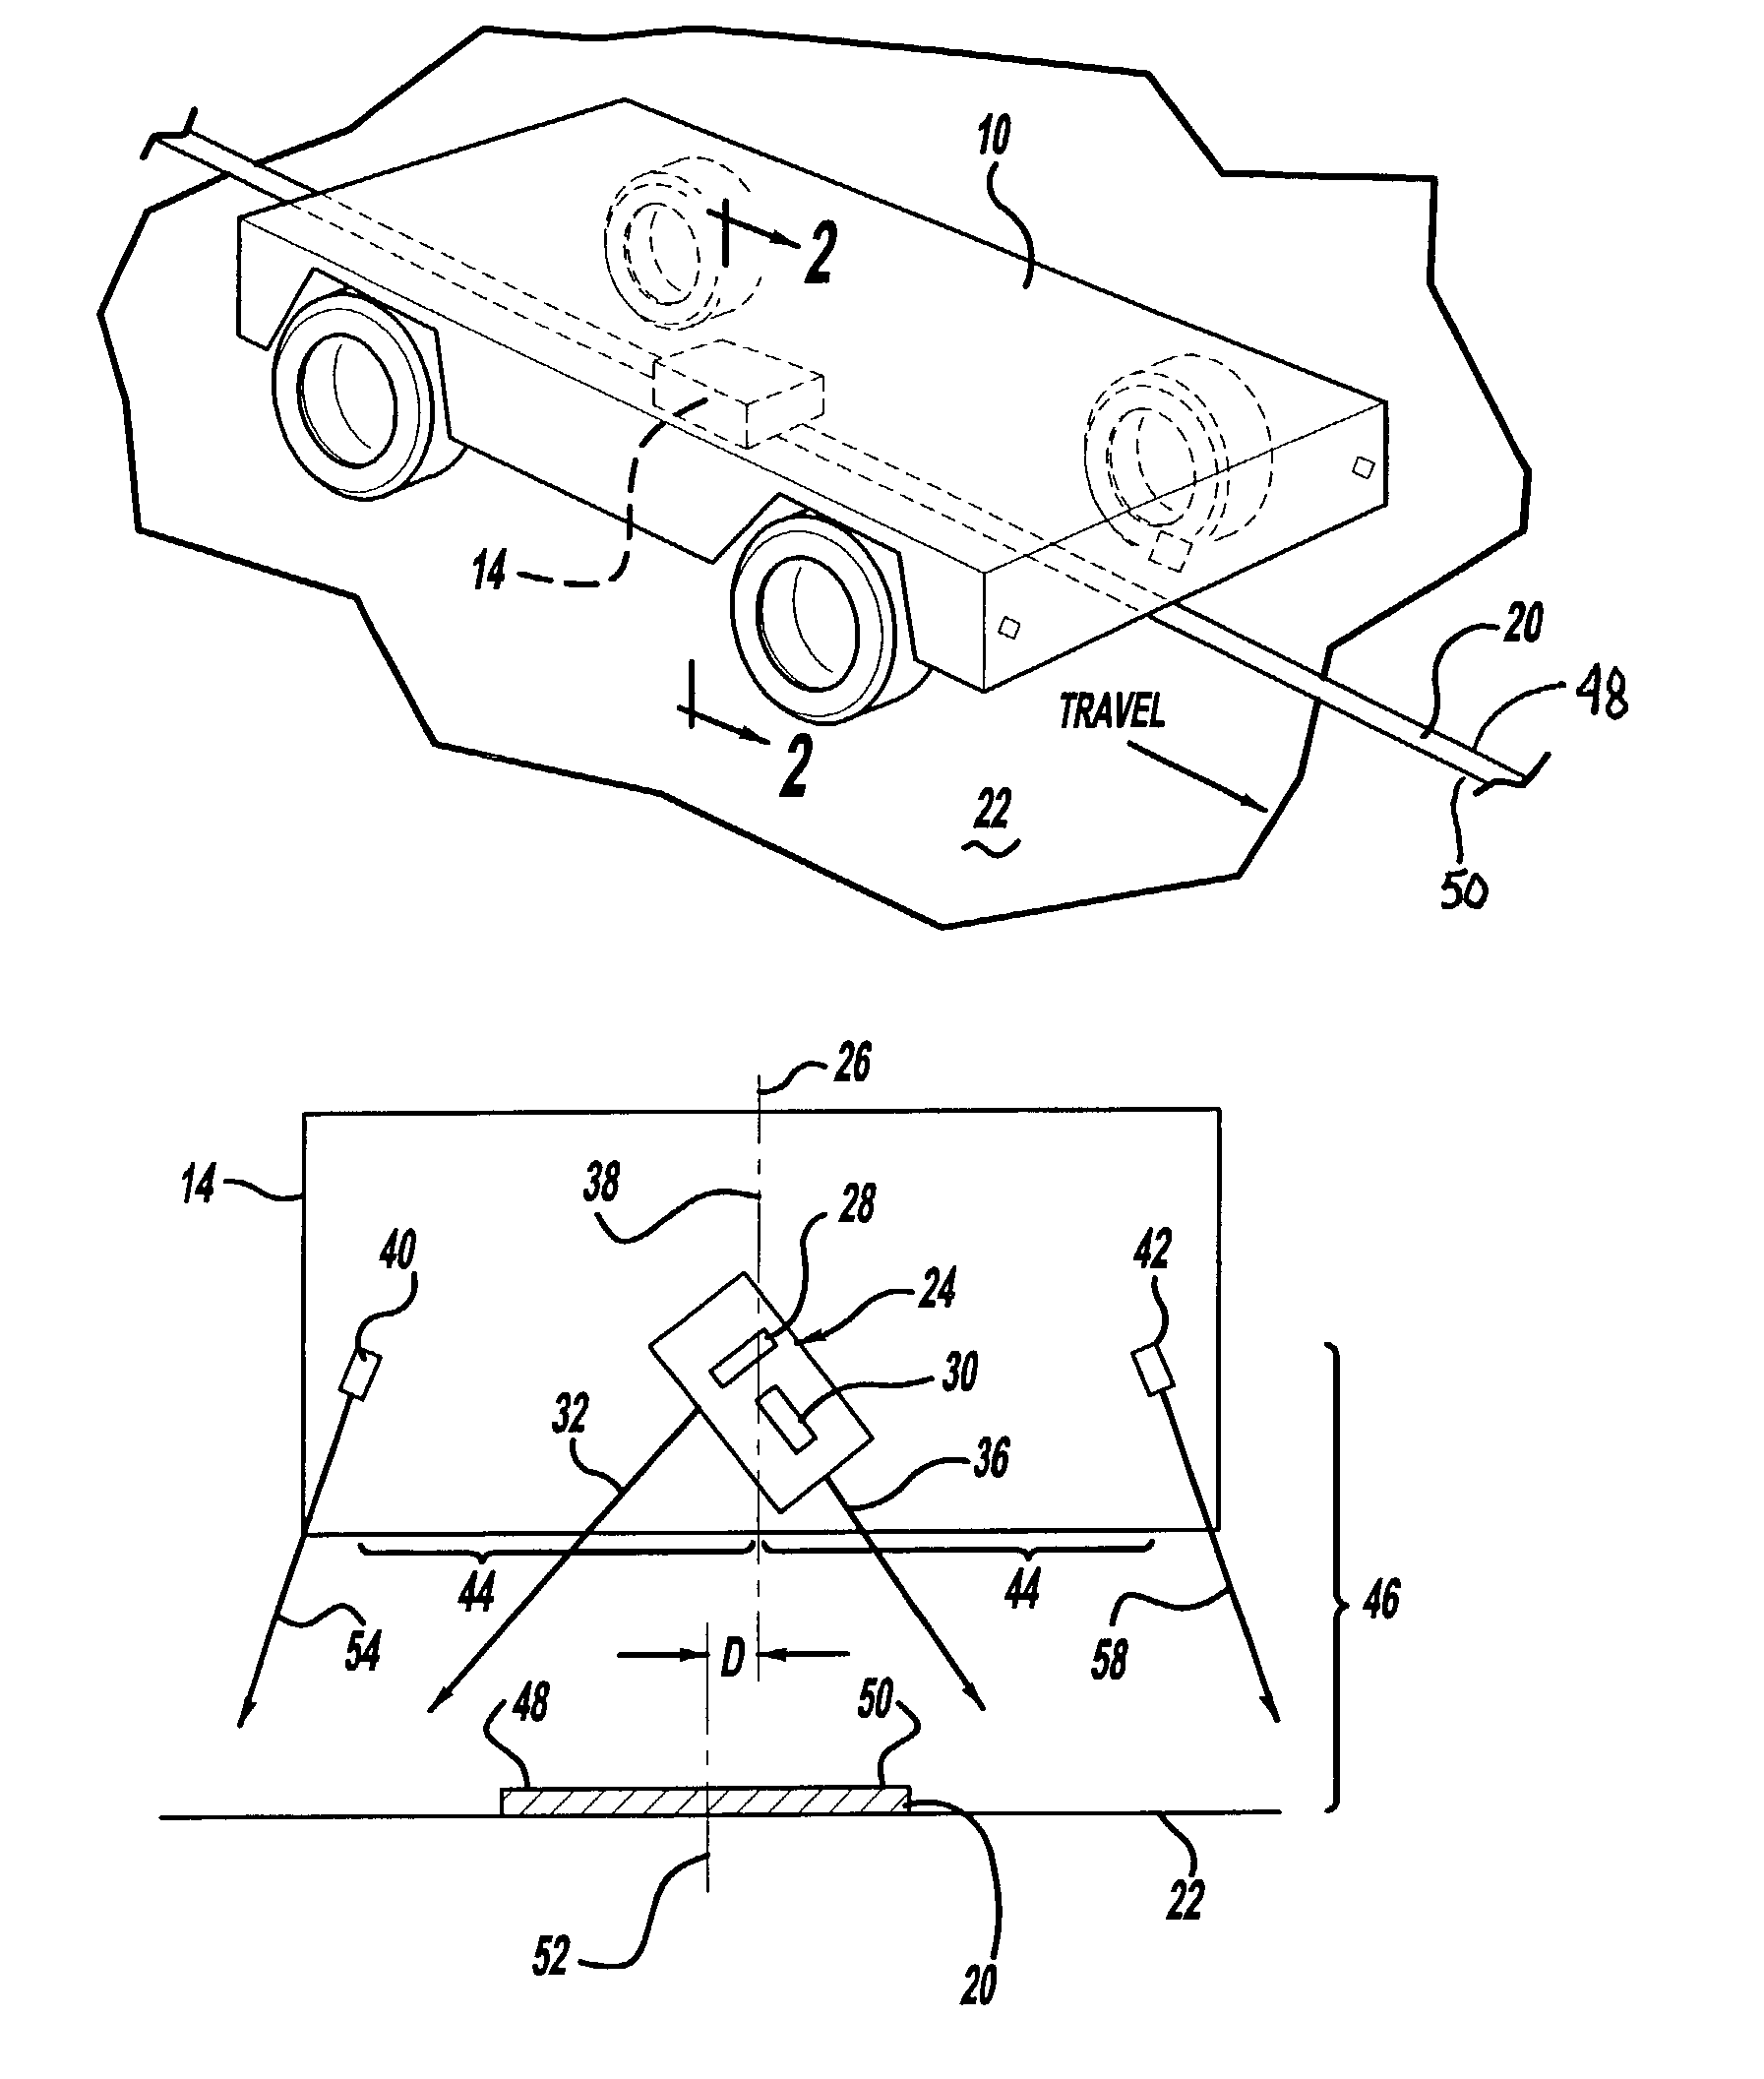 Driverless vehicle guidance system and method